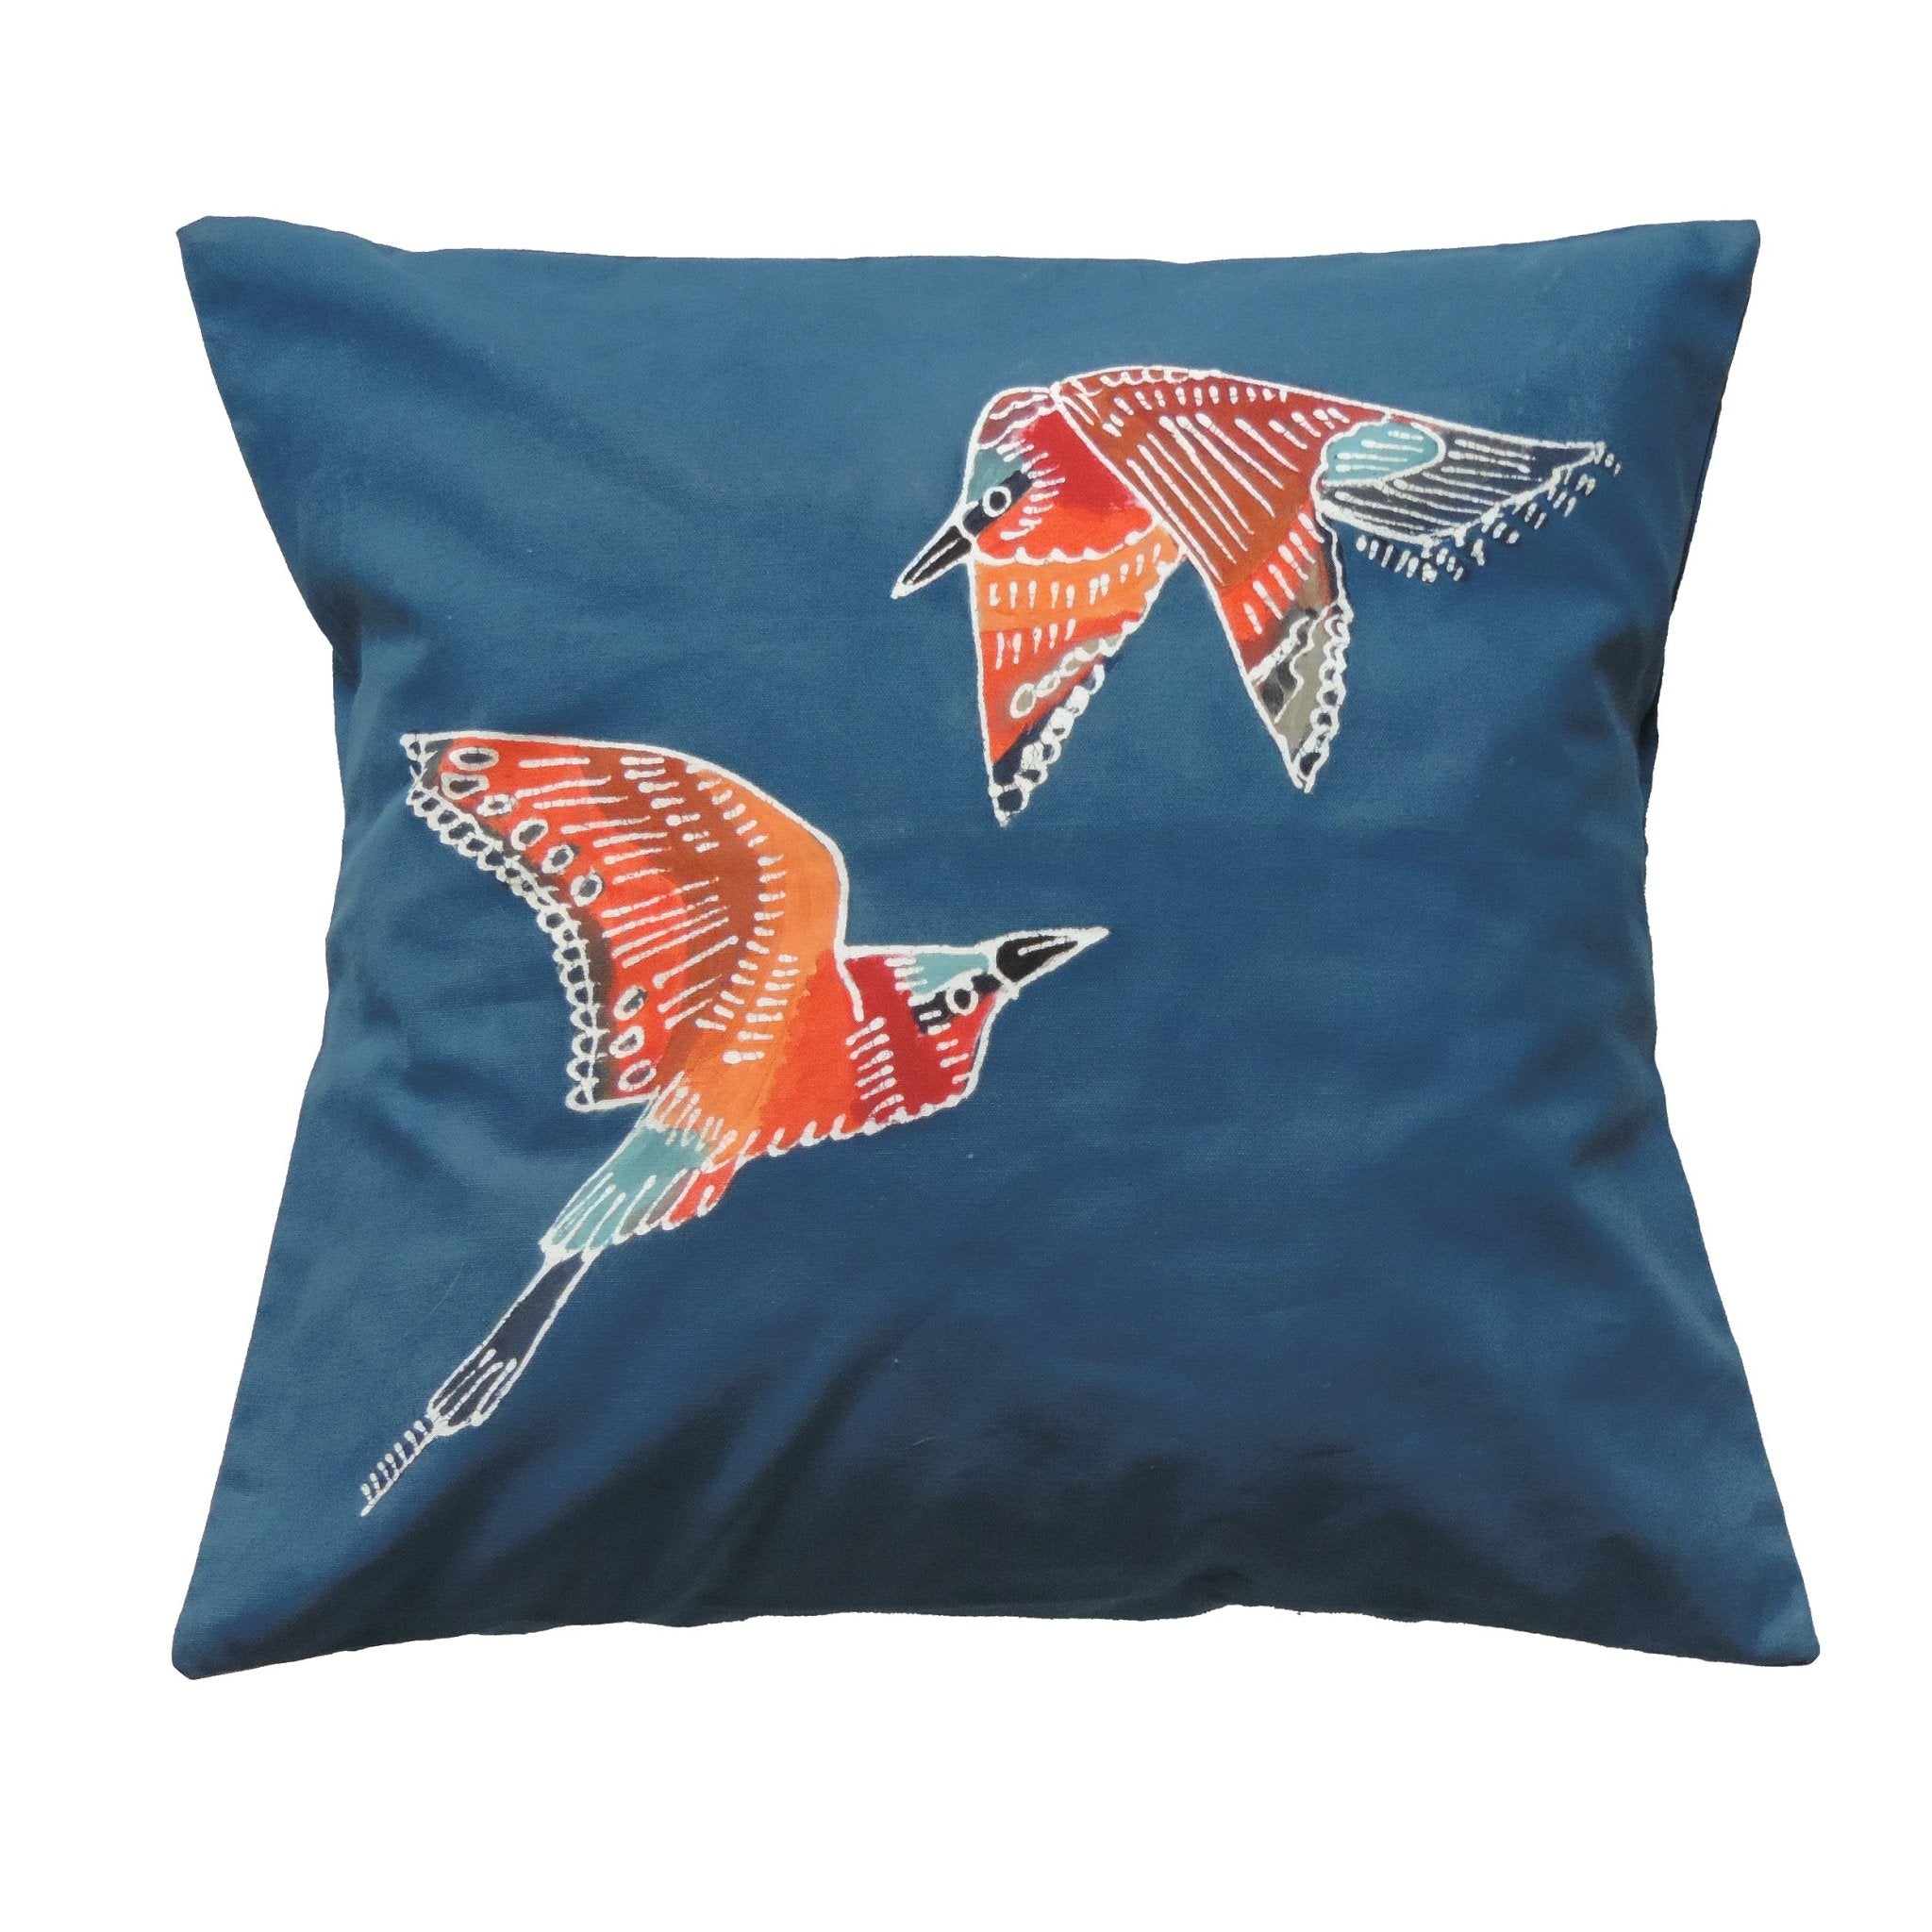 Papiko Carmine Bee Eater Cushion Cover - Hand Painted by TRIBAL TEXTILES - Handcrafted Home Decor Interiors - African Made